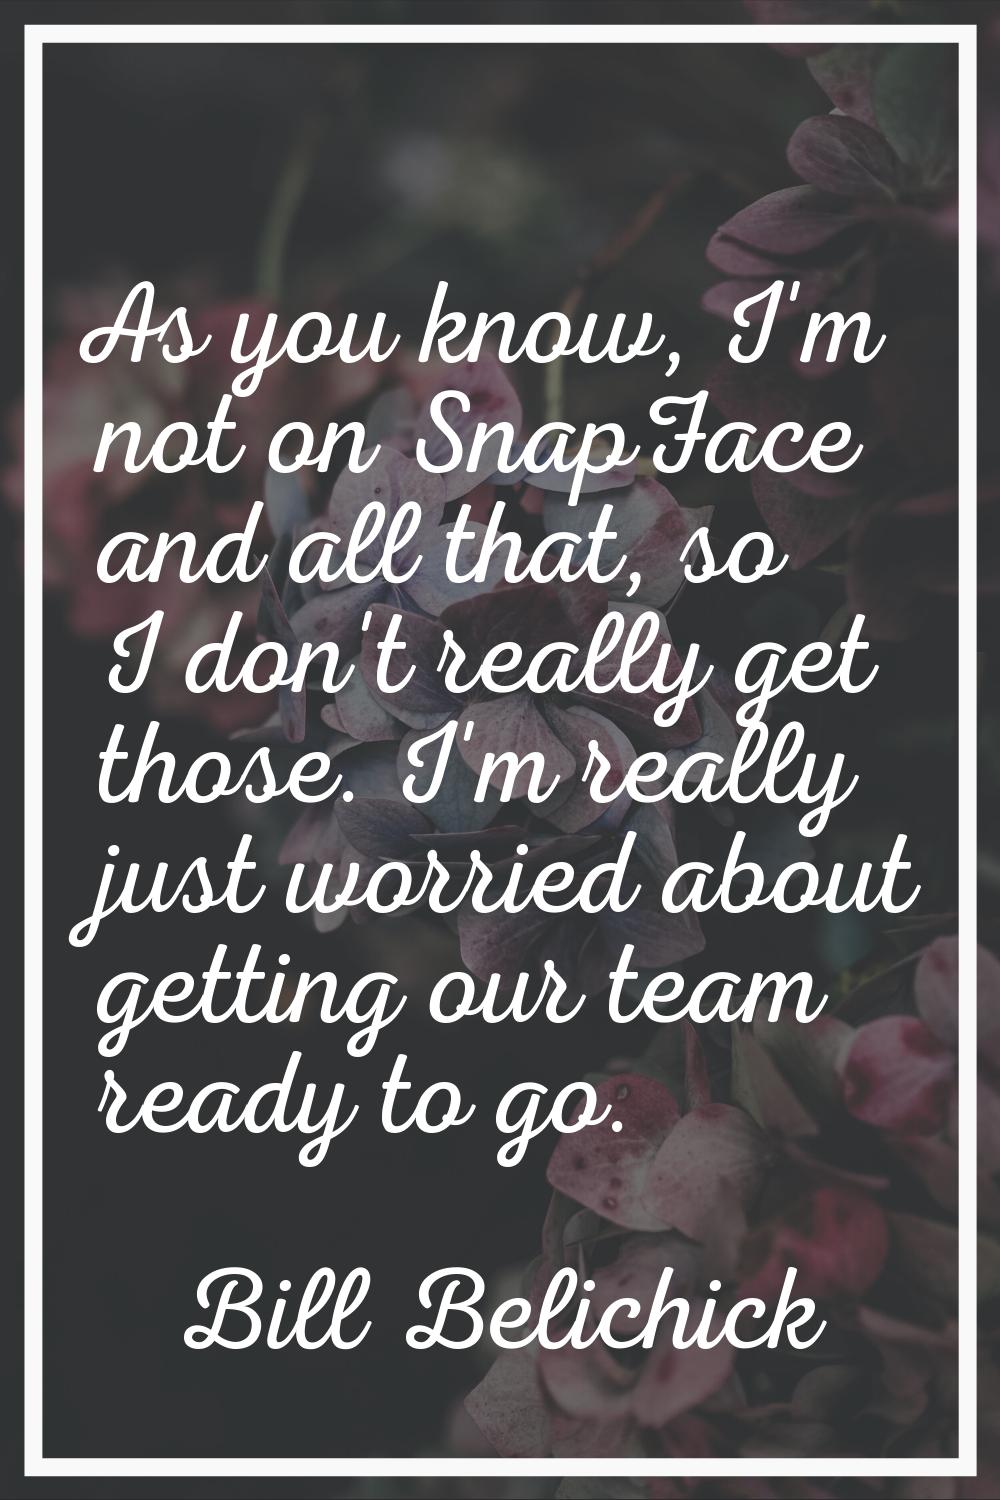 As you know, I'm not on SnapFace and all that, so I don't really get those. I'm really just worried